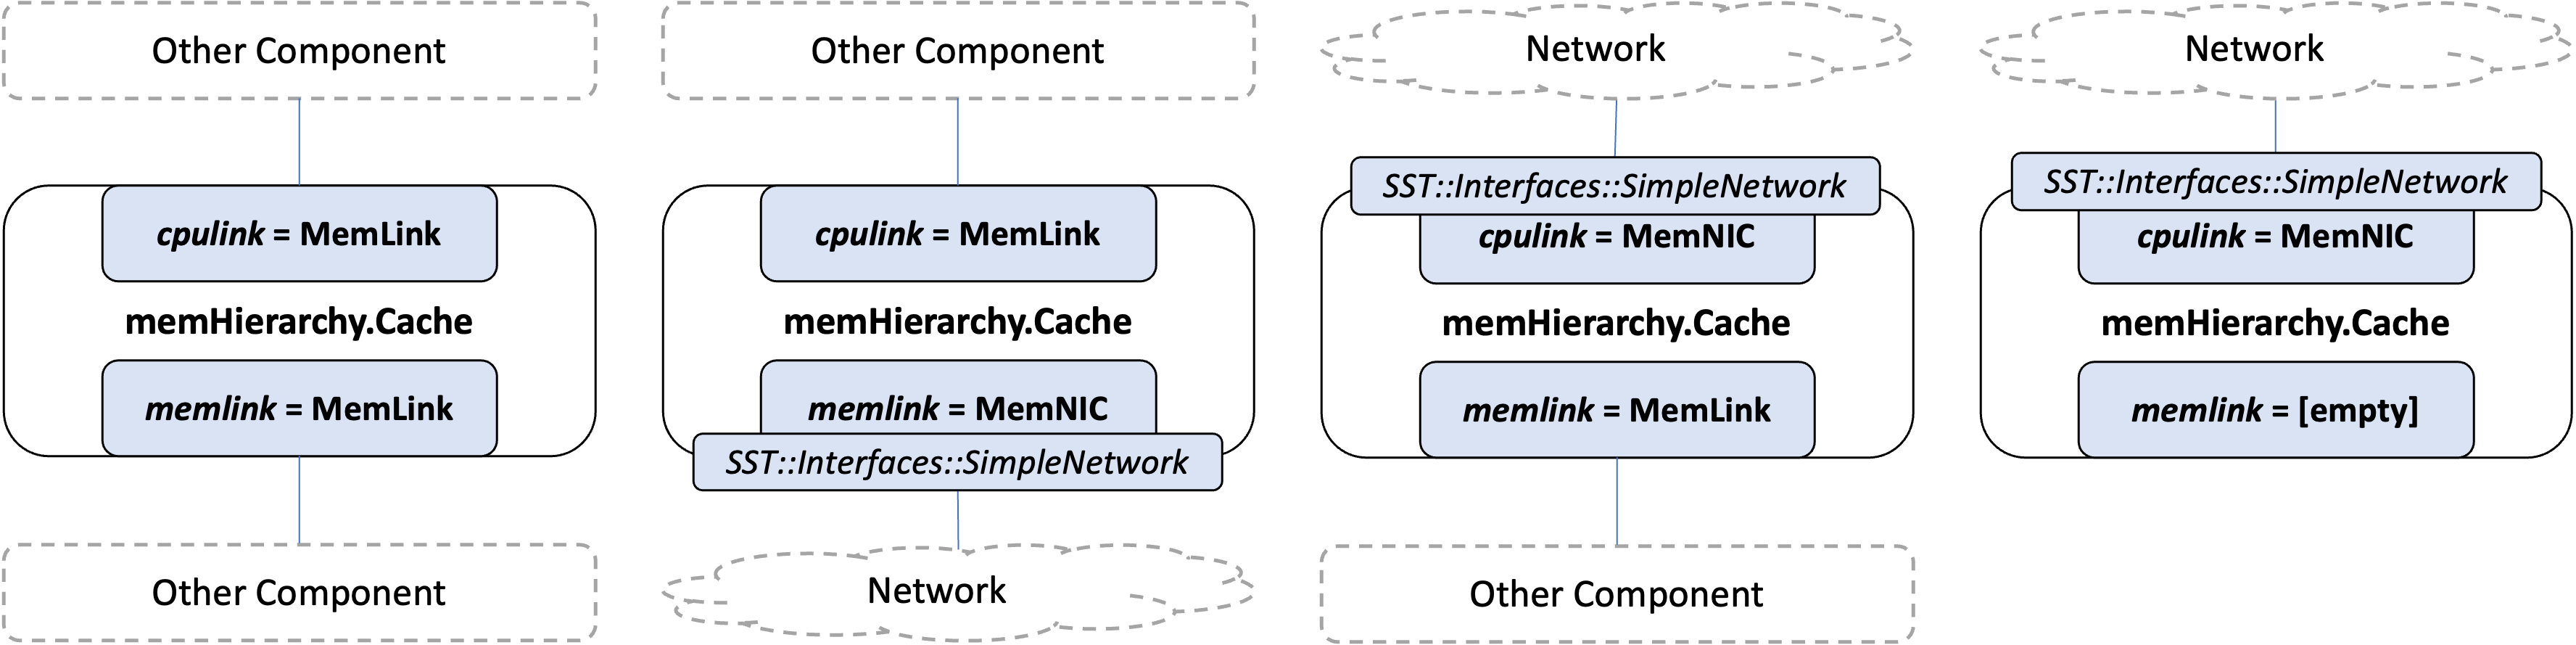 Configuring memHierarchy cache links